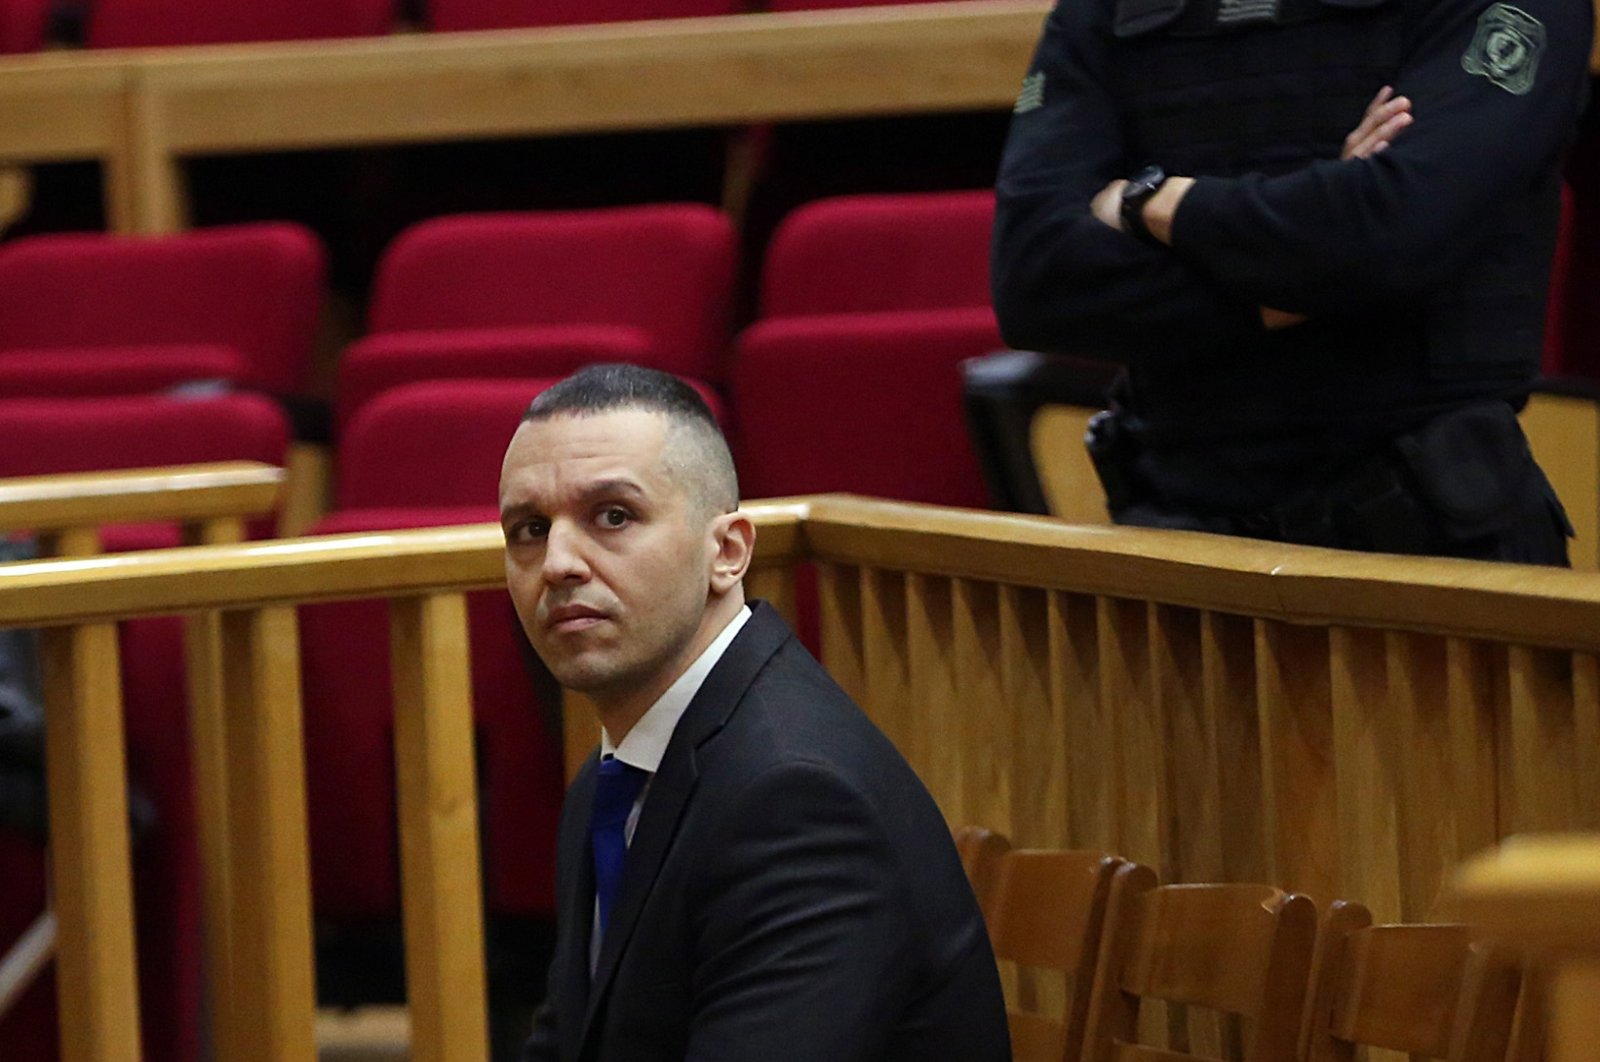 Former Greek deputy Ilias Kasidiaris (L), who was sentenced to 13 years in jail for being a member of and leading the neo-Nazi criminal organization Golden Dawn, at the Athens Appeals Court, Greece, Dec. 14, 2022. (EPA Photo)